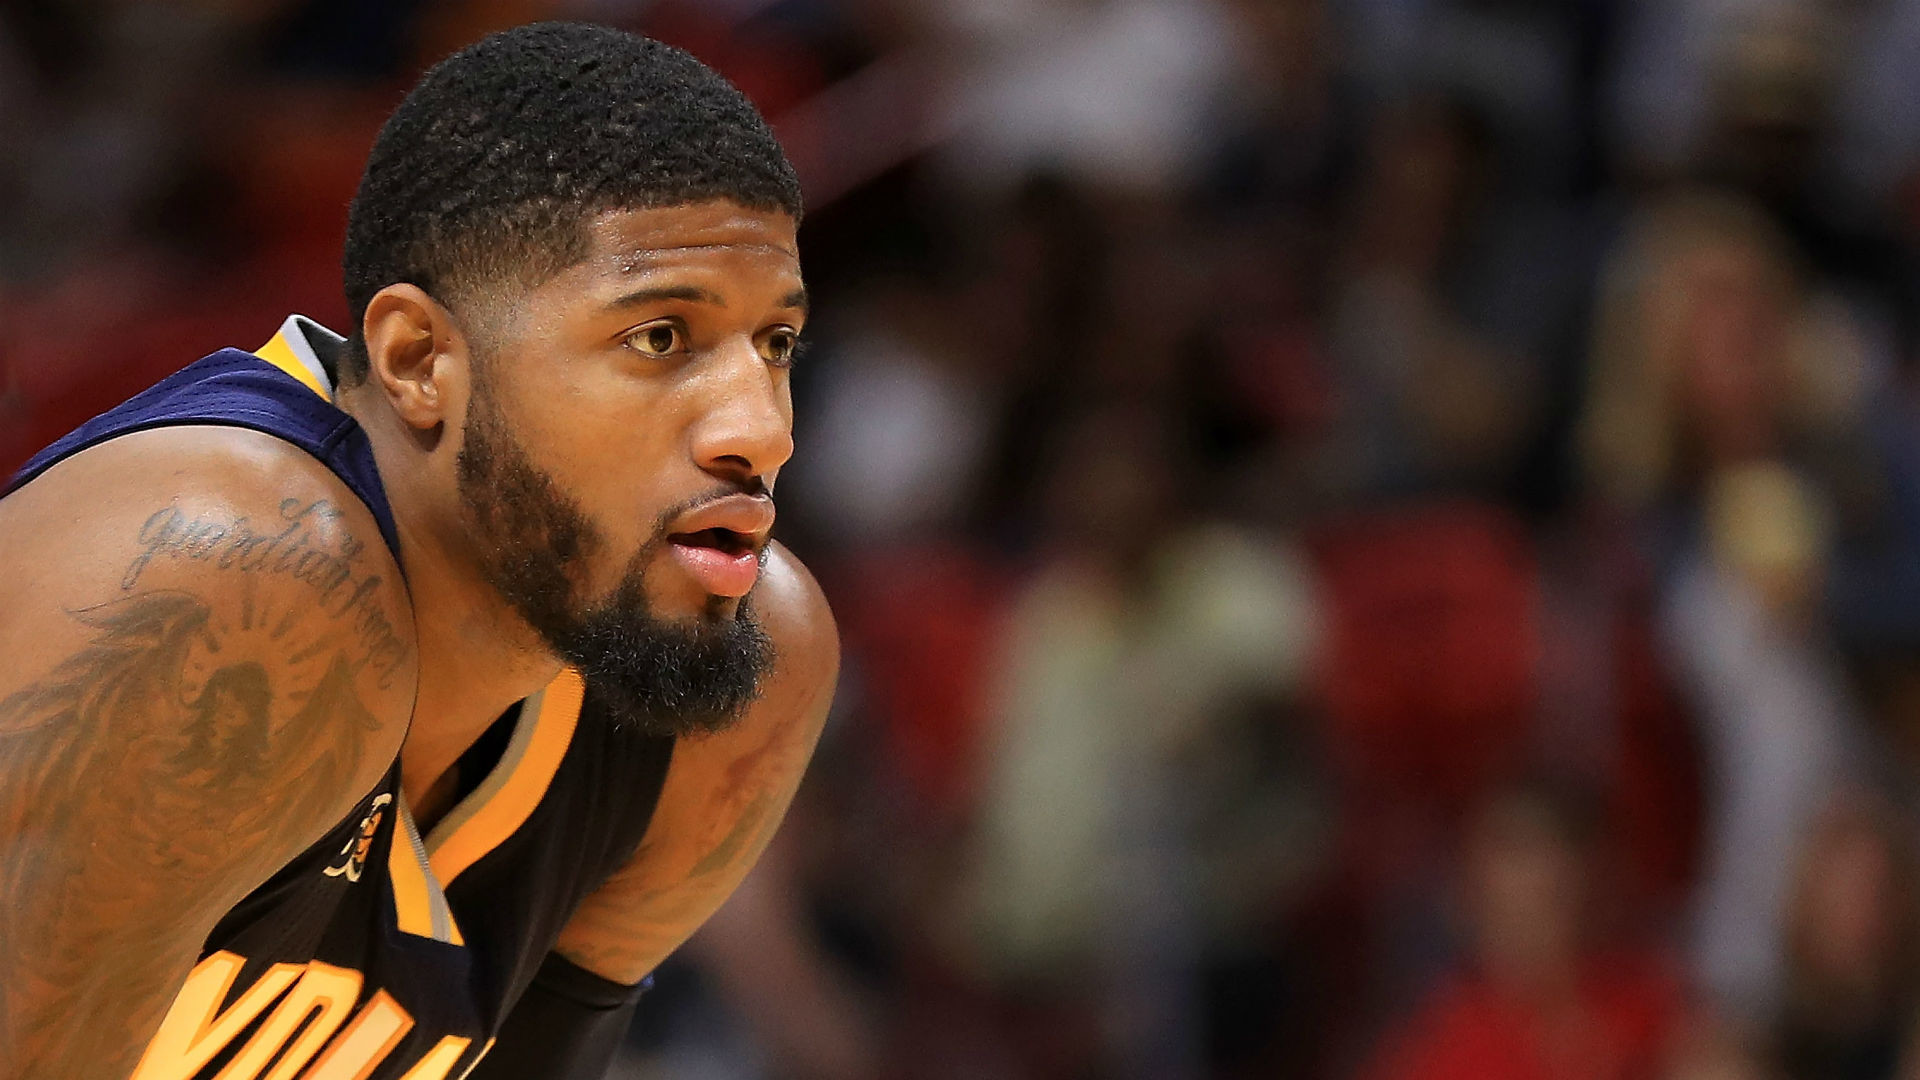 1920x1080 For Paul George and the Pacers, the future remains murky | NBA | Sporting  News